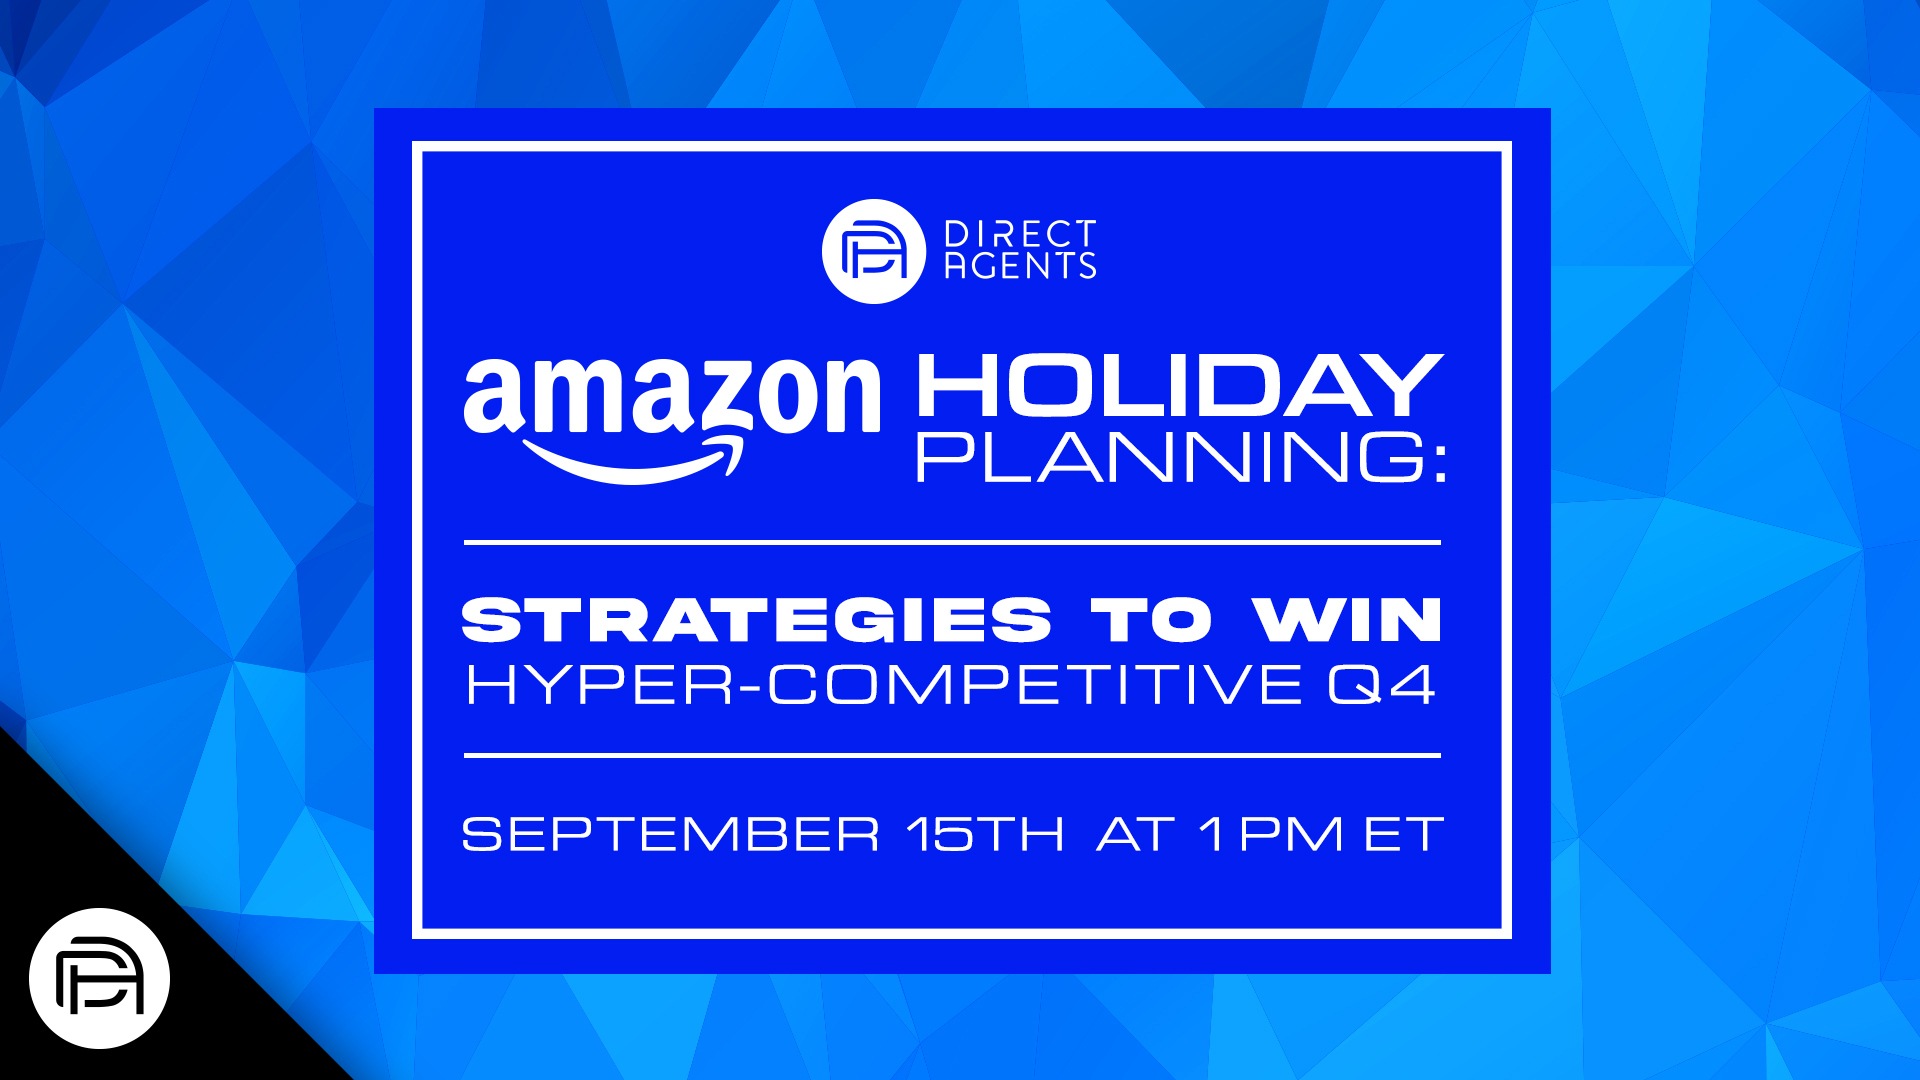 Amazon Holiday Planning: Strategies to Win a Hyper-Competitive Q4